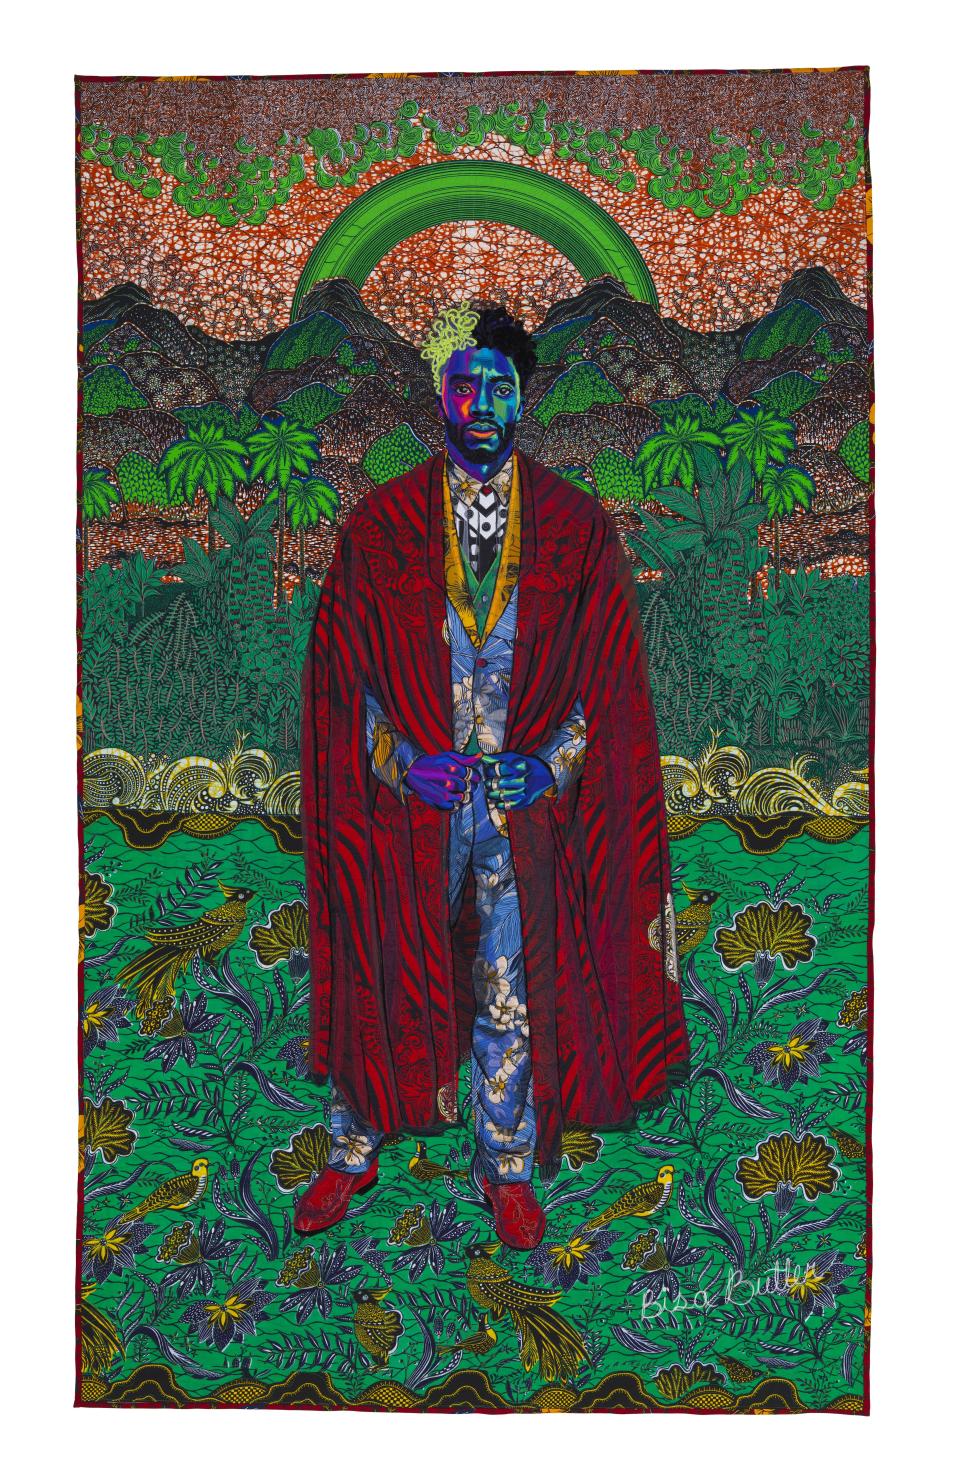 Chadwick Boseman is regally represented via quilted and appliqued cotton, silk, wool, velvet and sequins in a 2020 portrait titled "Forever."